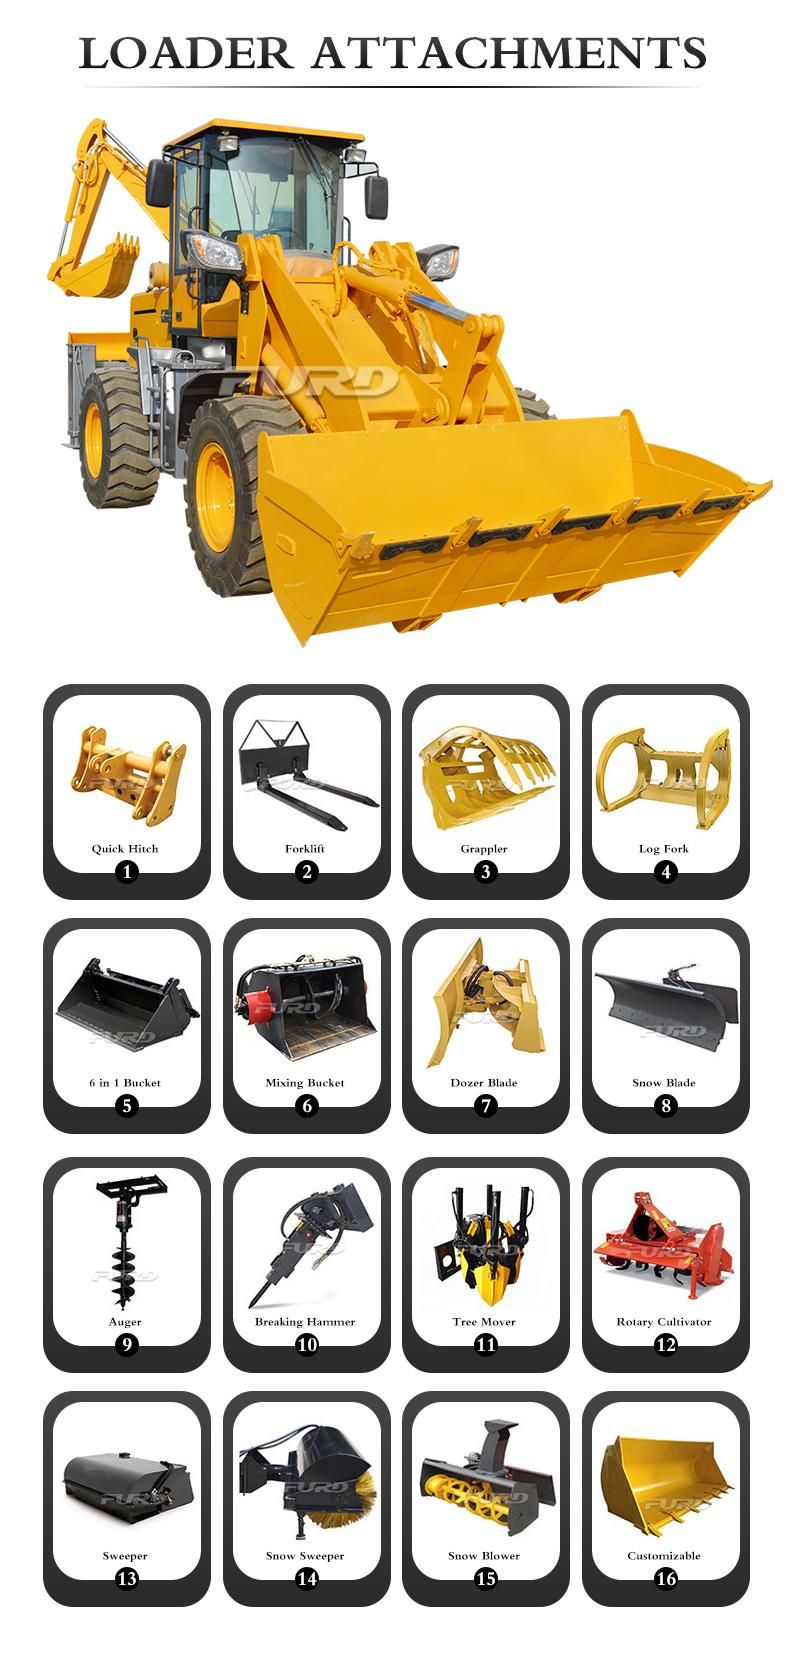 Backhoe Loader Excavator with Grass Cutter Hydraulic Hammer for Sale Fwz15-26